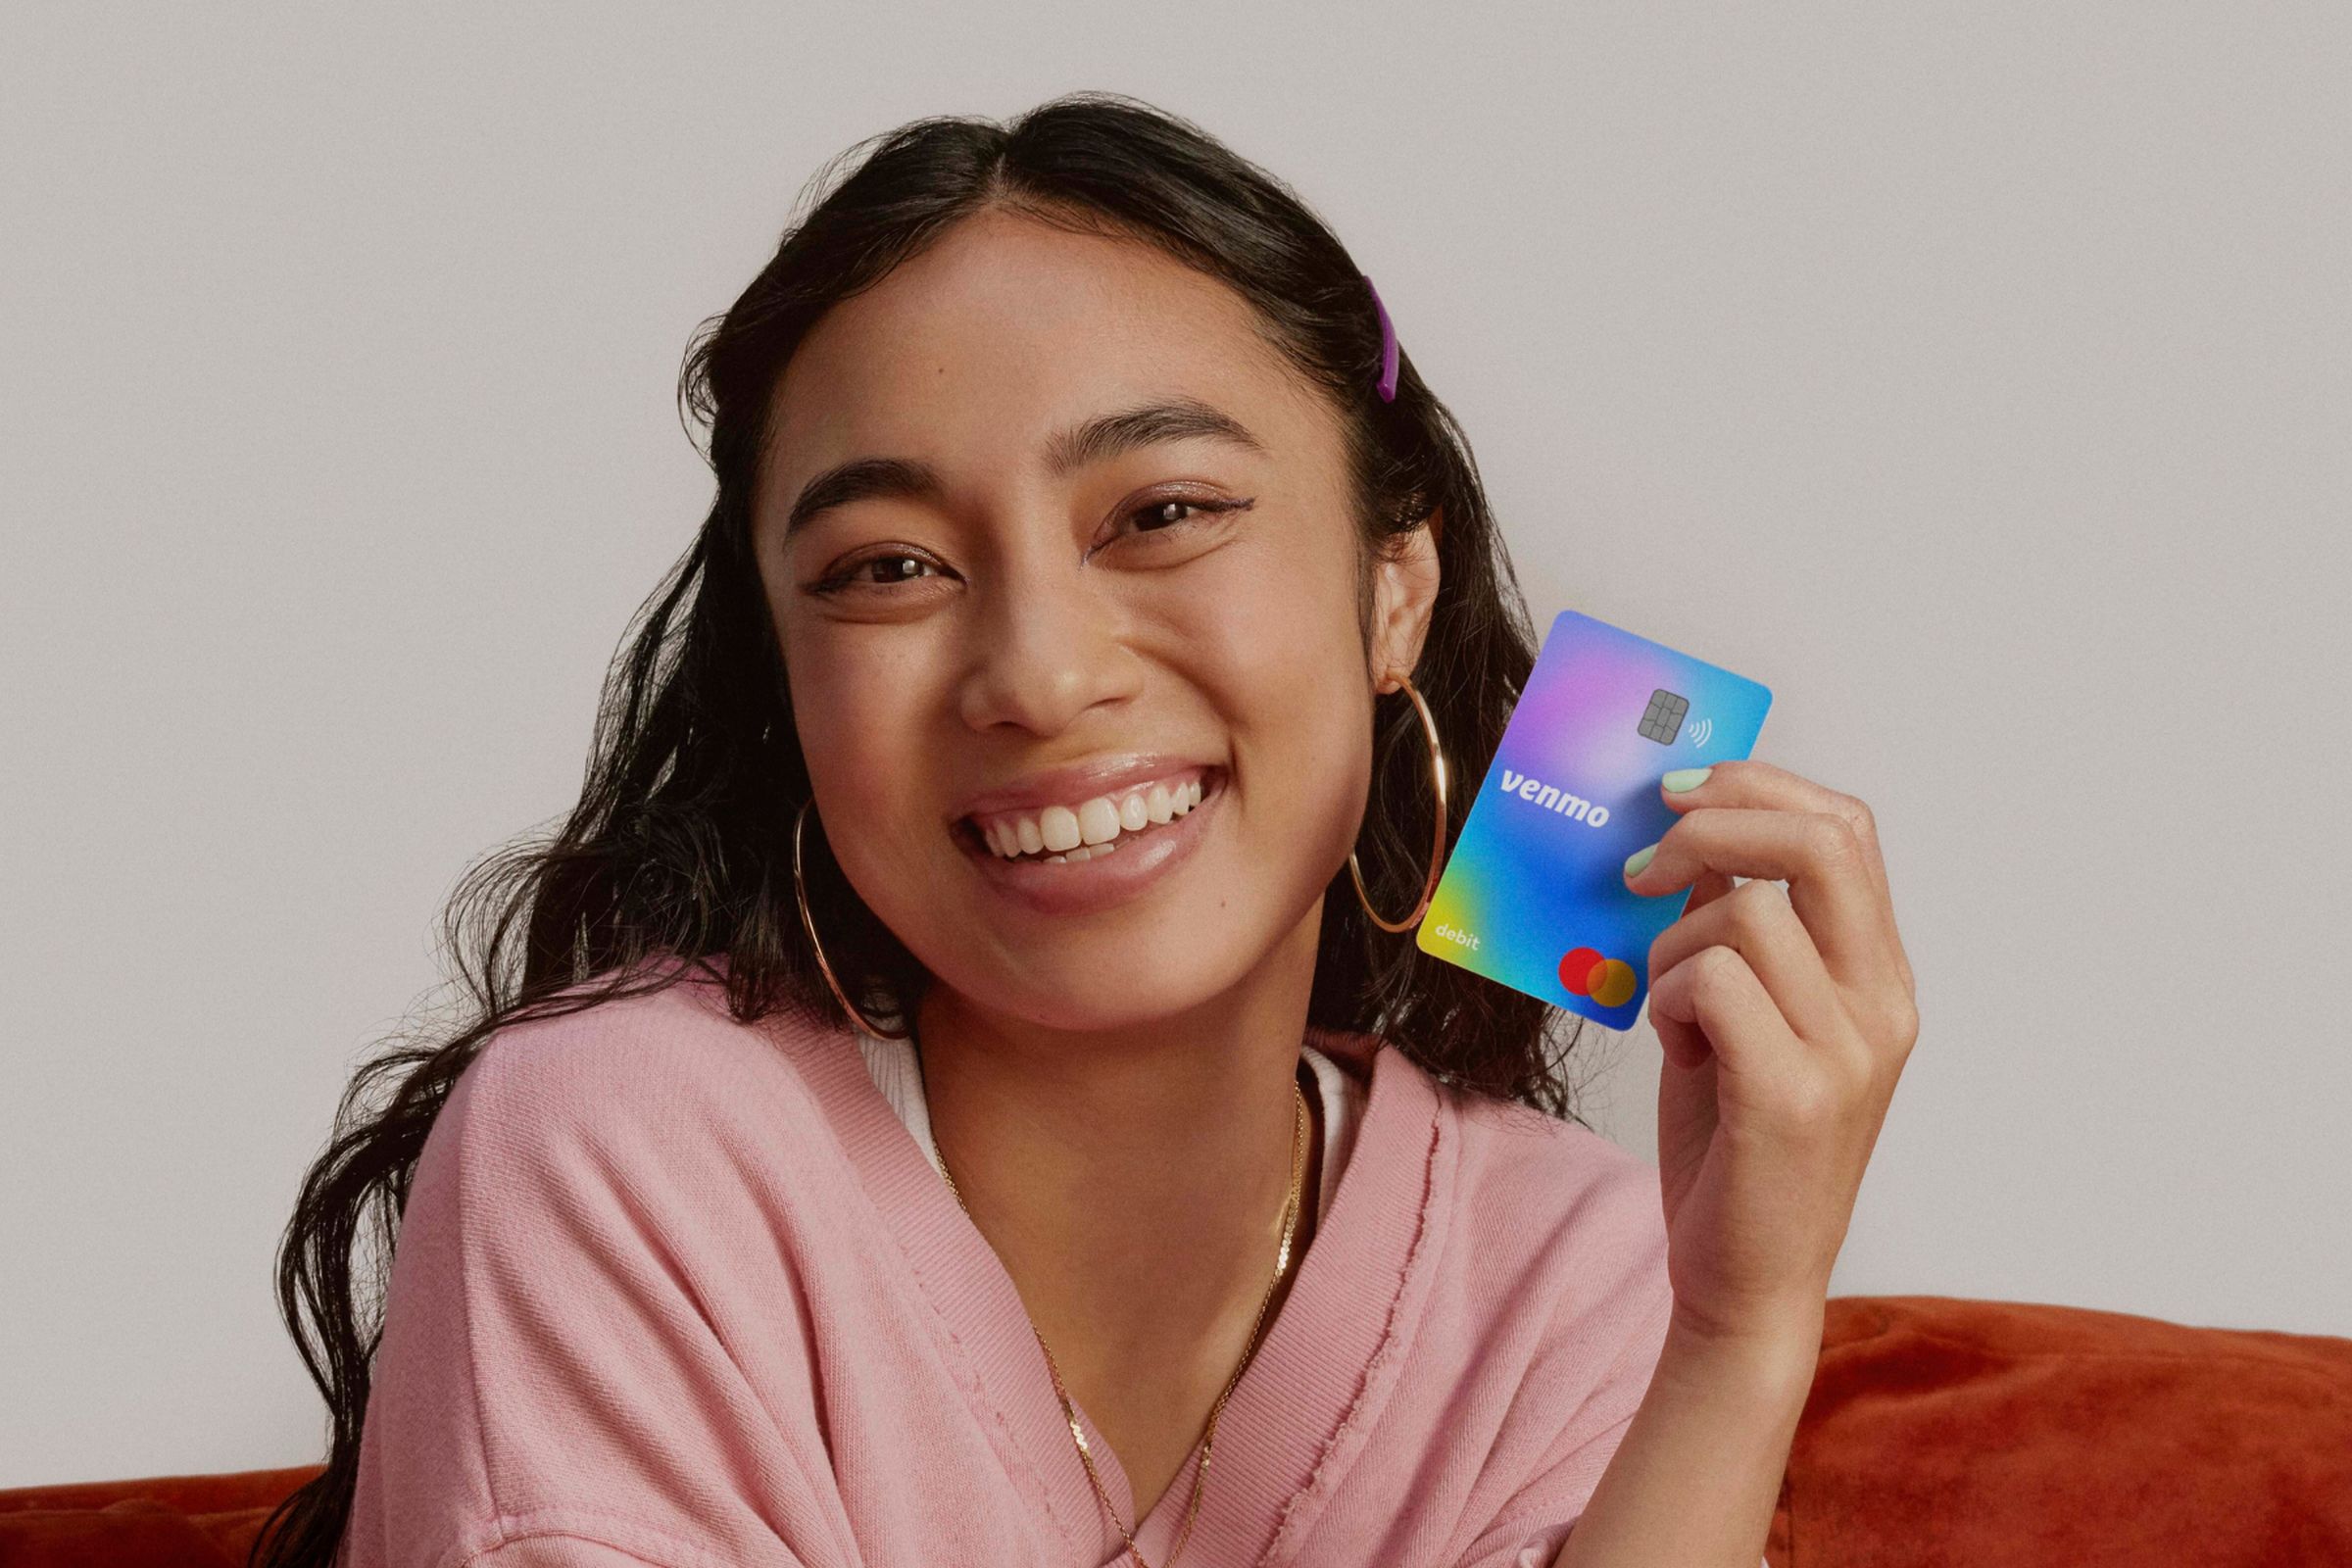 A young teenager smiling while holding a Venmo Teen Debit Card.